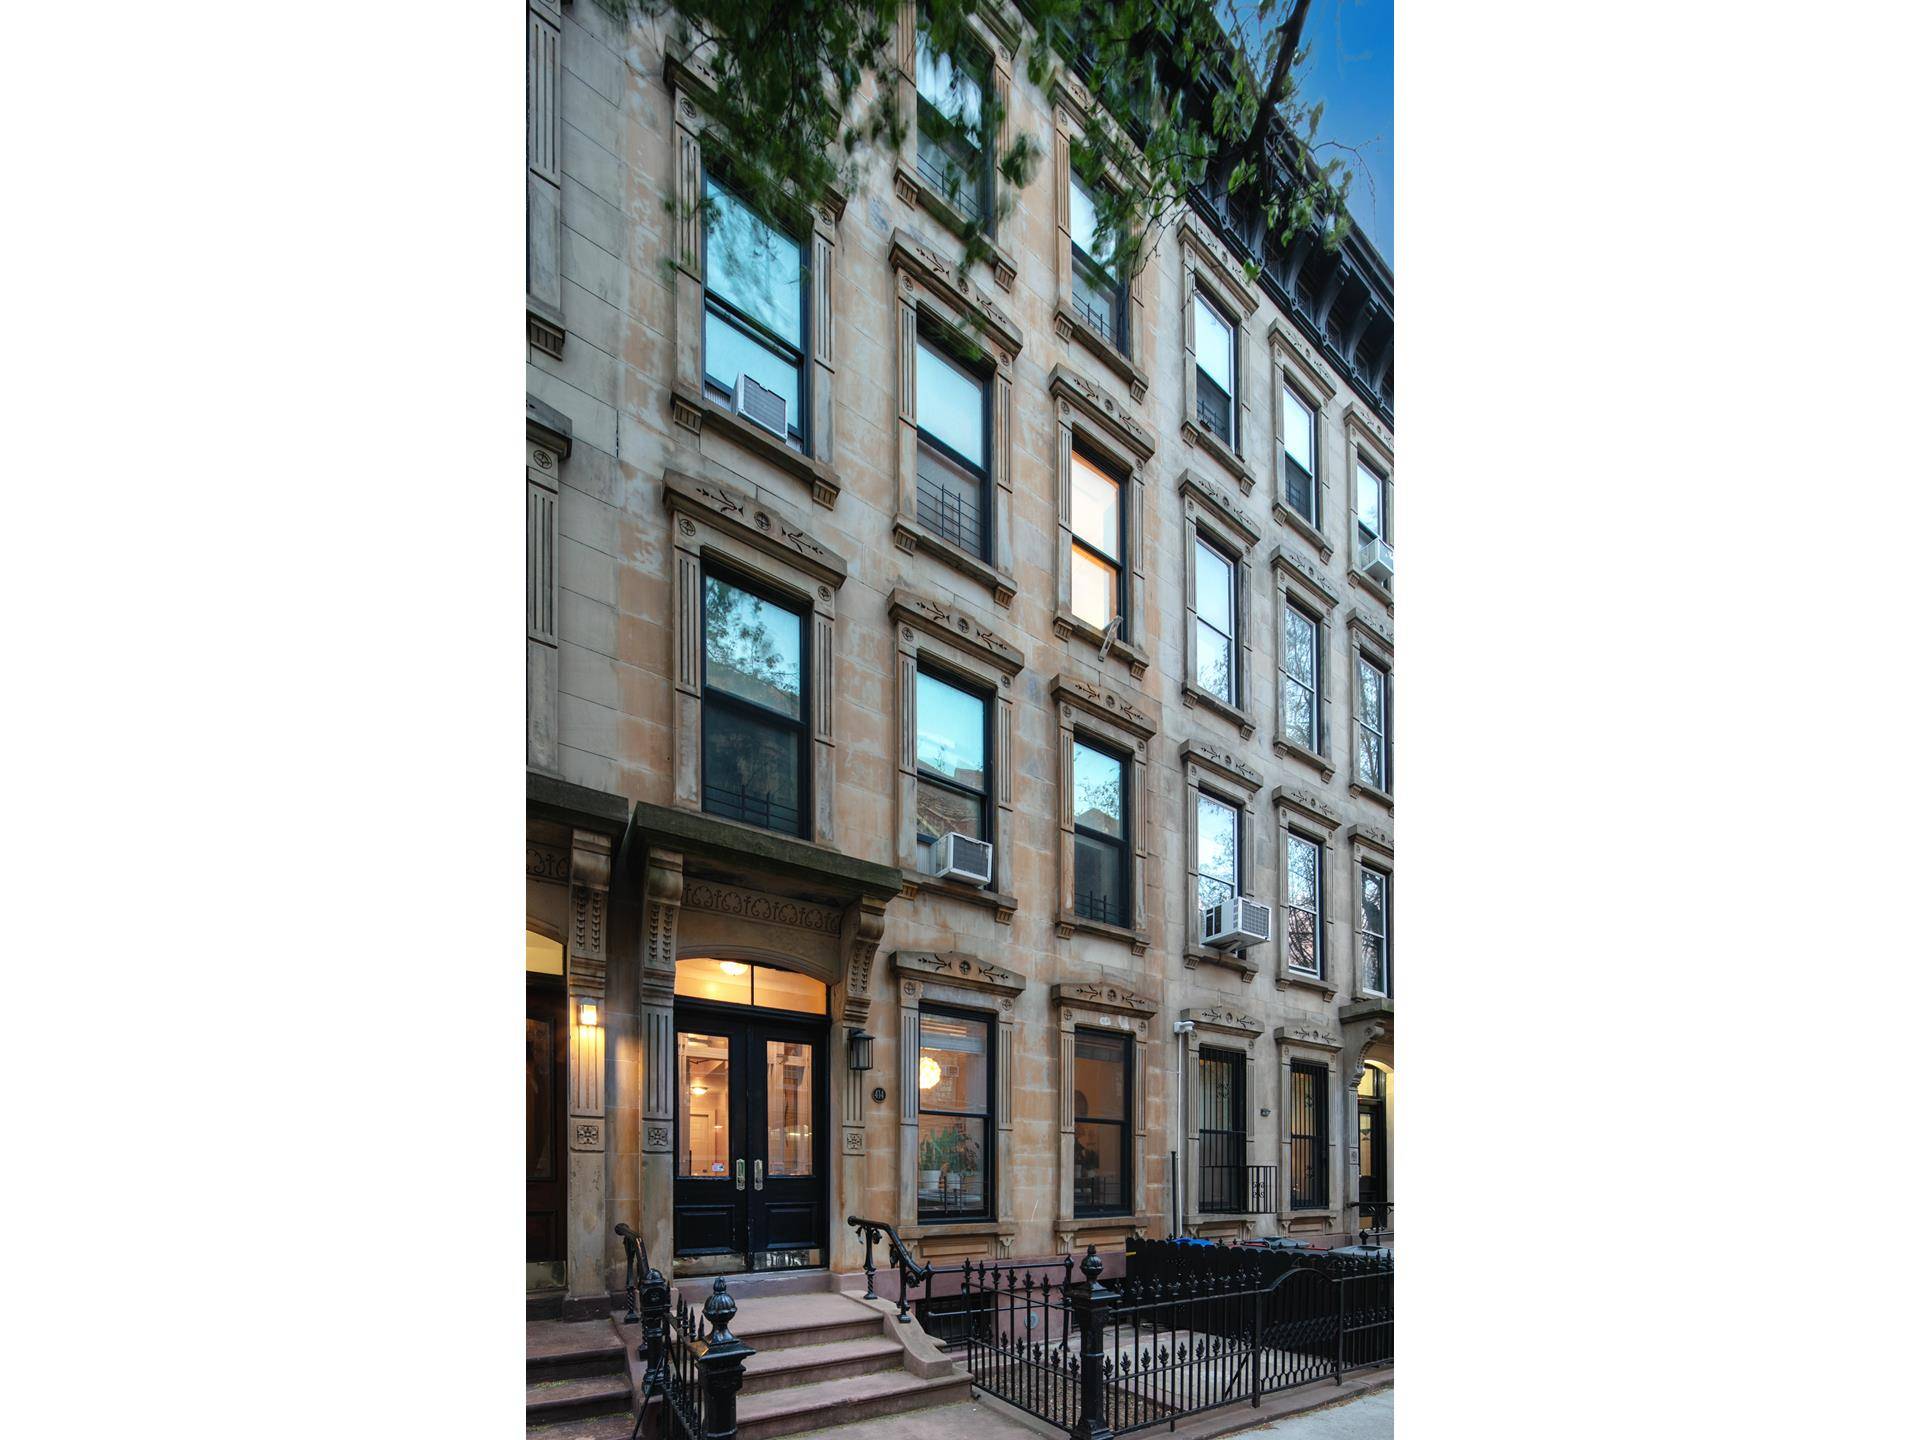 Now available and yours to take advantage of before it's gone is an exceptional multifamily offering in one of Cobble Hill's most sought after locations.